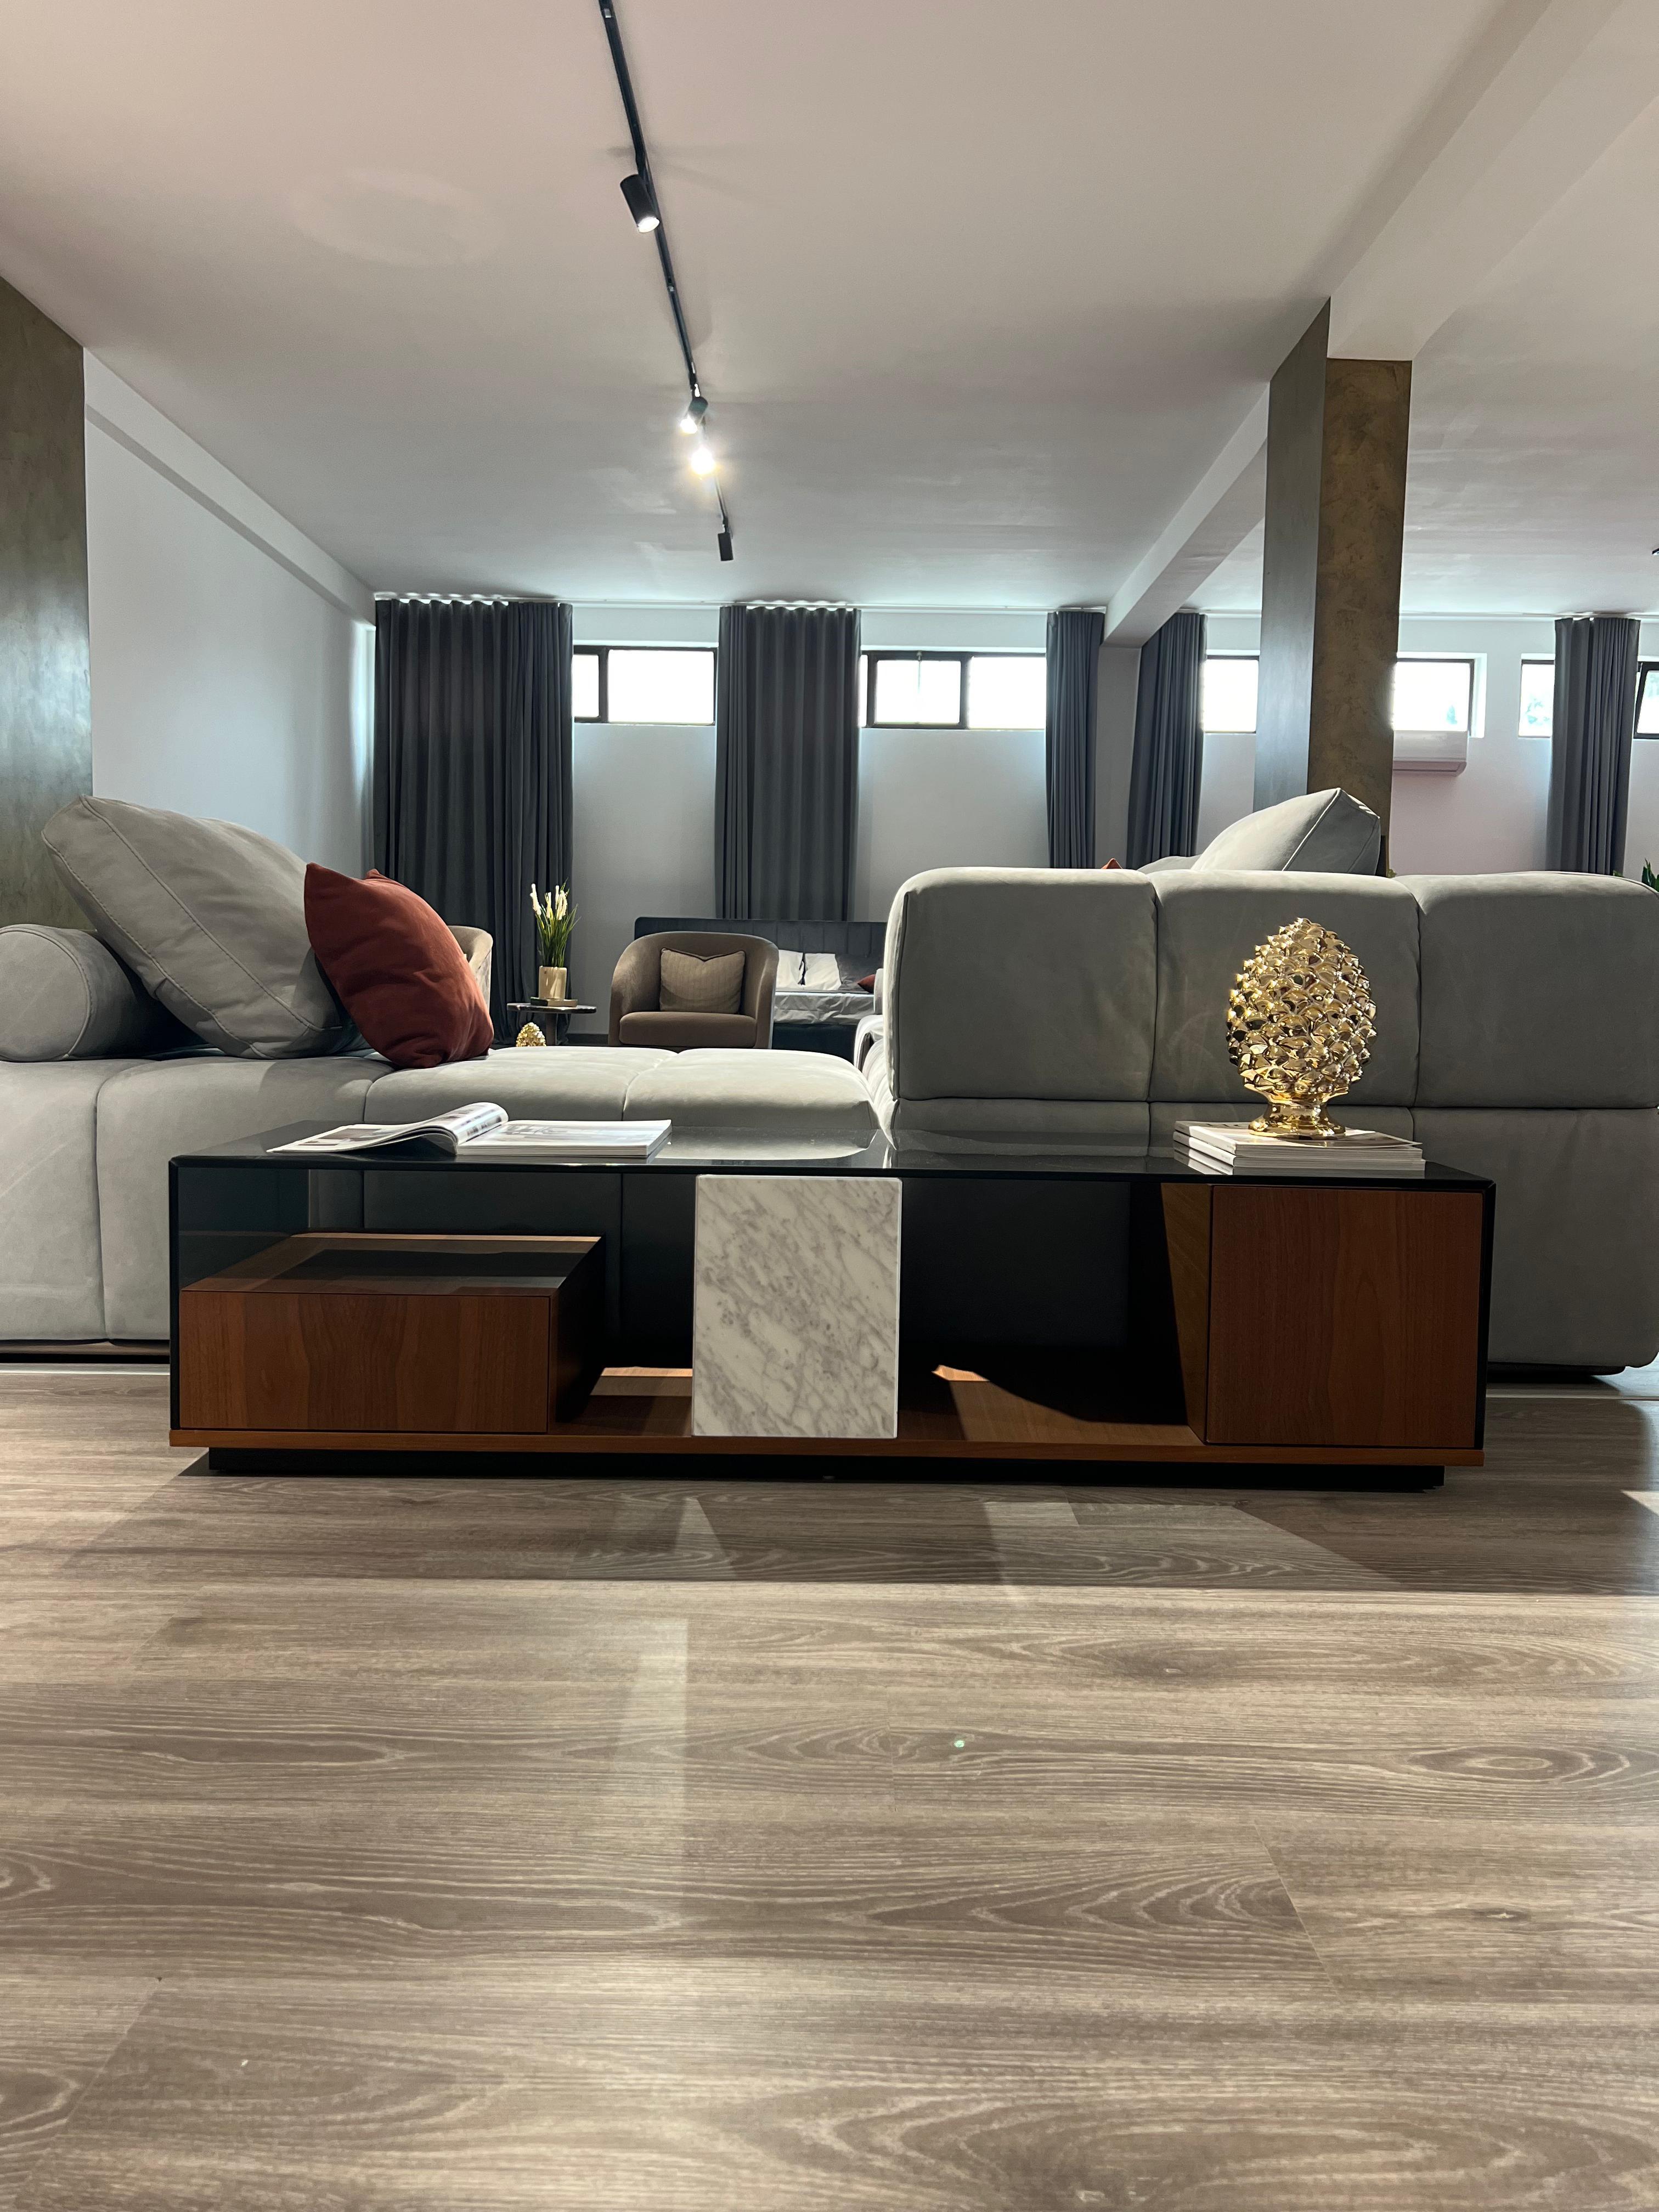 Each element of the living area comes together to create the perfect blend of functionality and aesthetics, giving rooms unparalleled elegance. Our Ryan low coffee table can enrich any room, form a functional element for a sofa, or become an